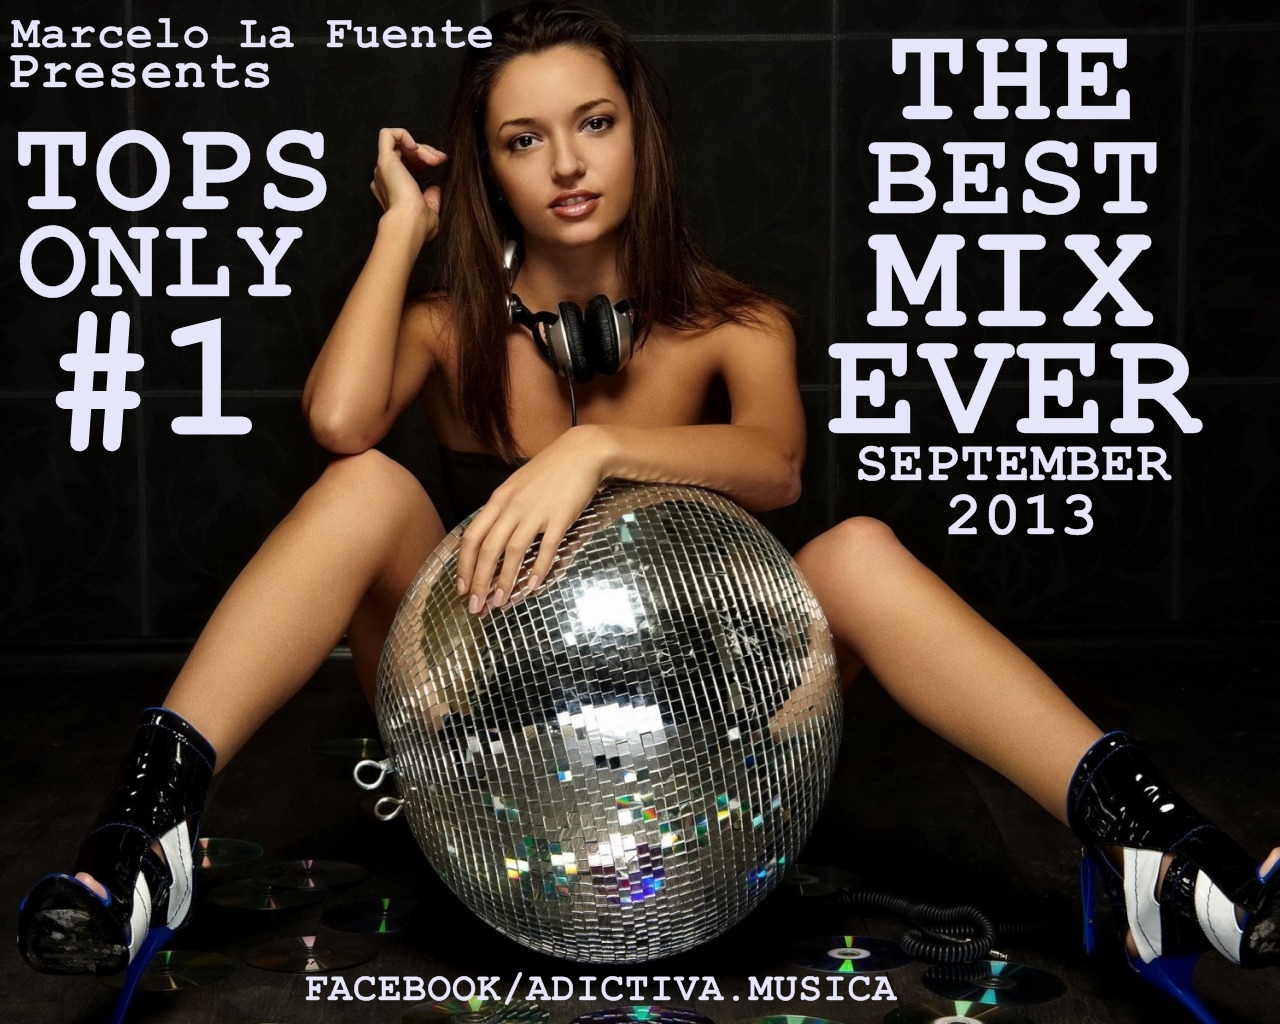 THE BEST MIX EVER - TOP ONLY 1 SEPT 2013